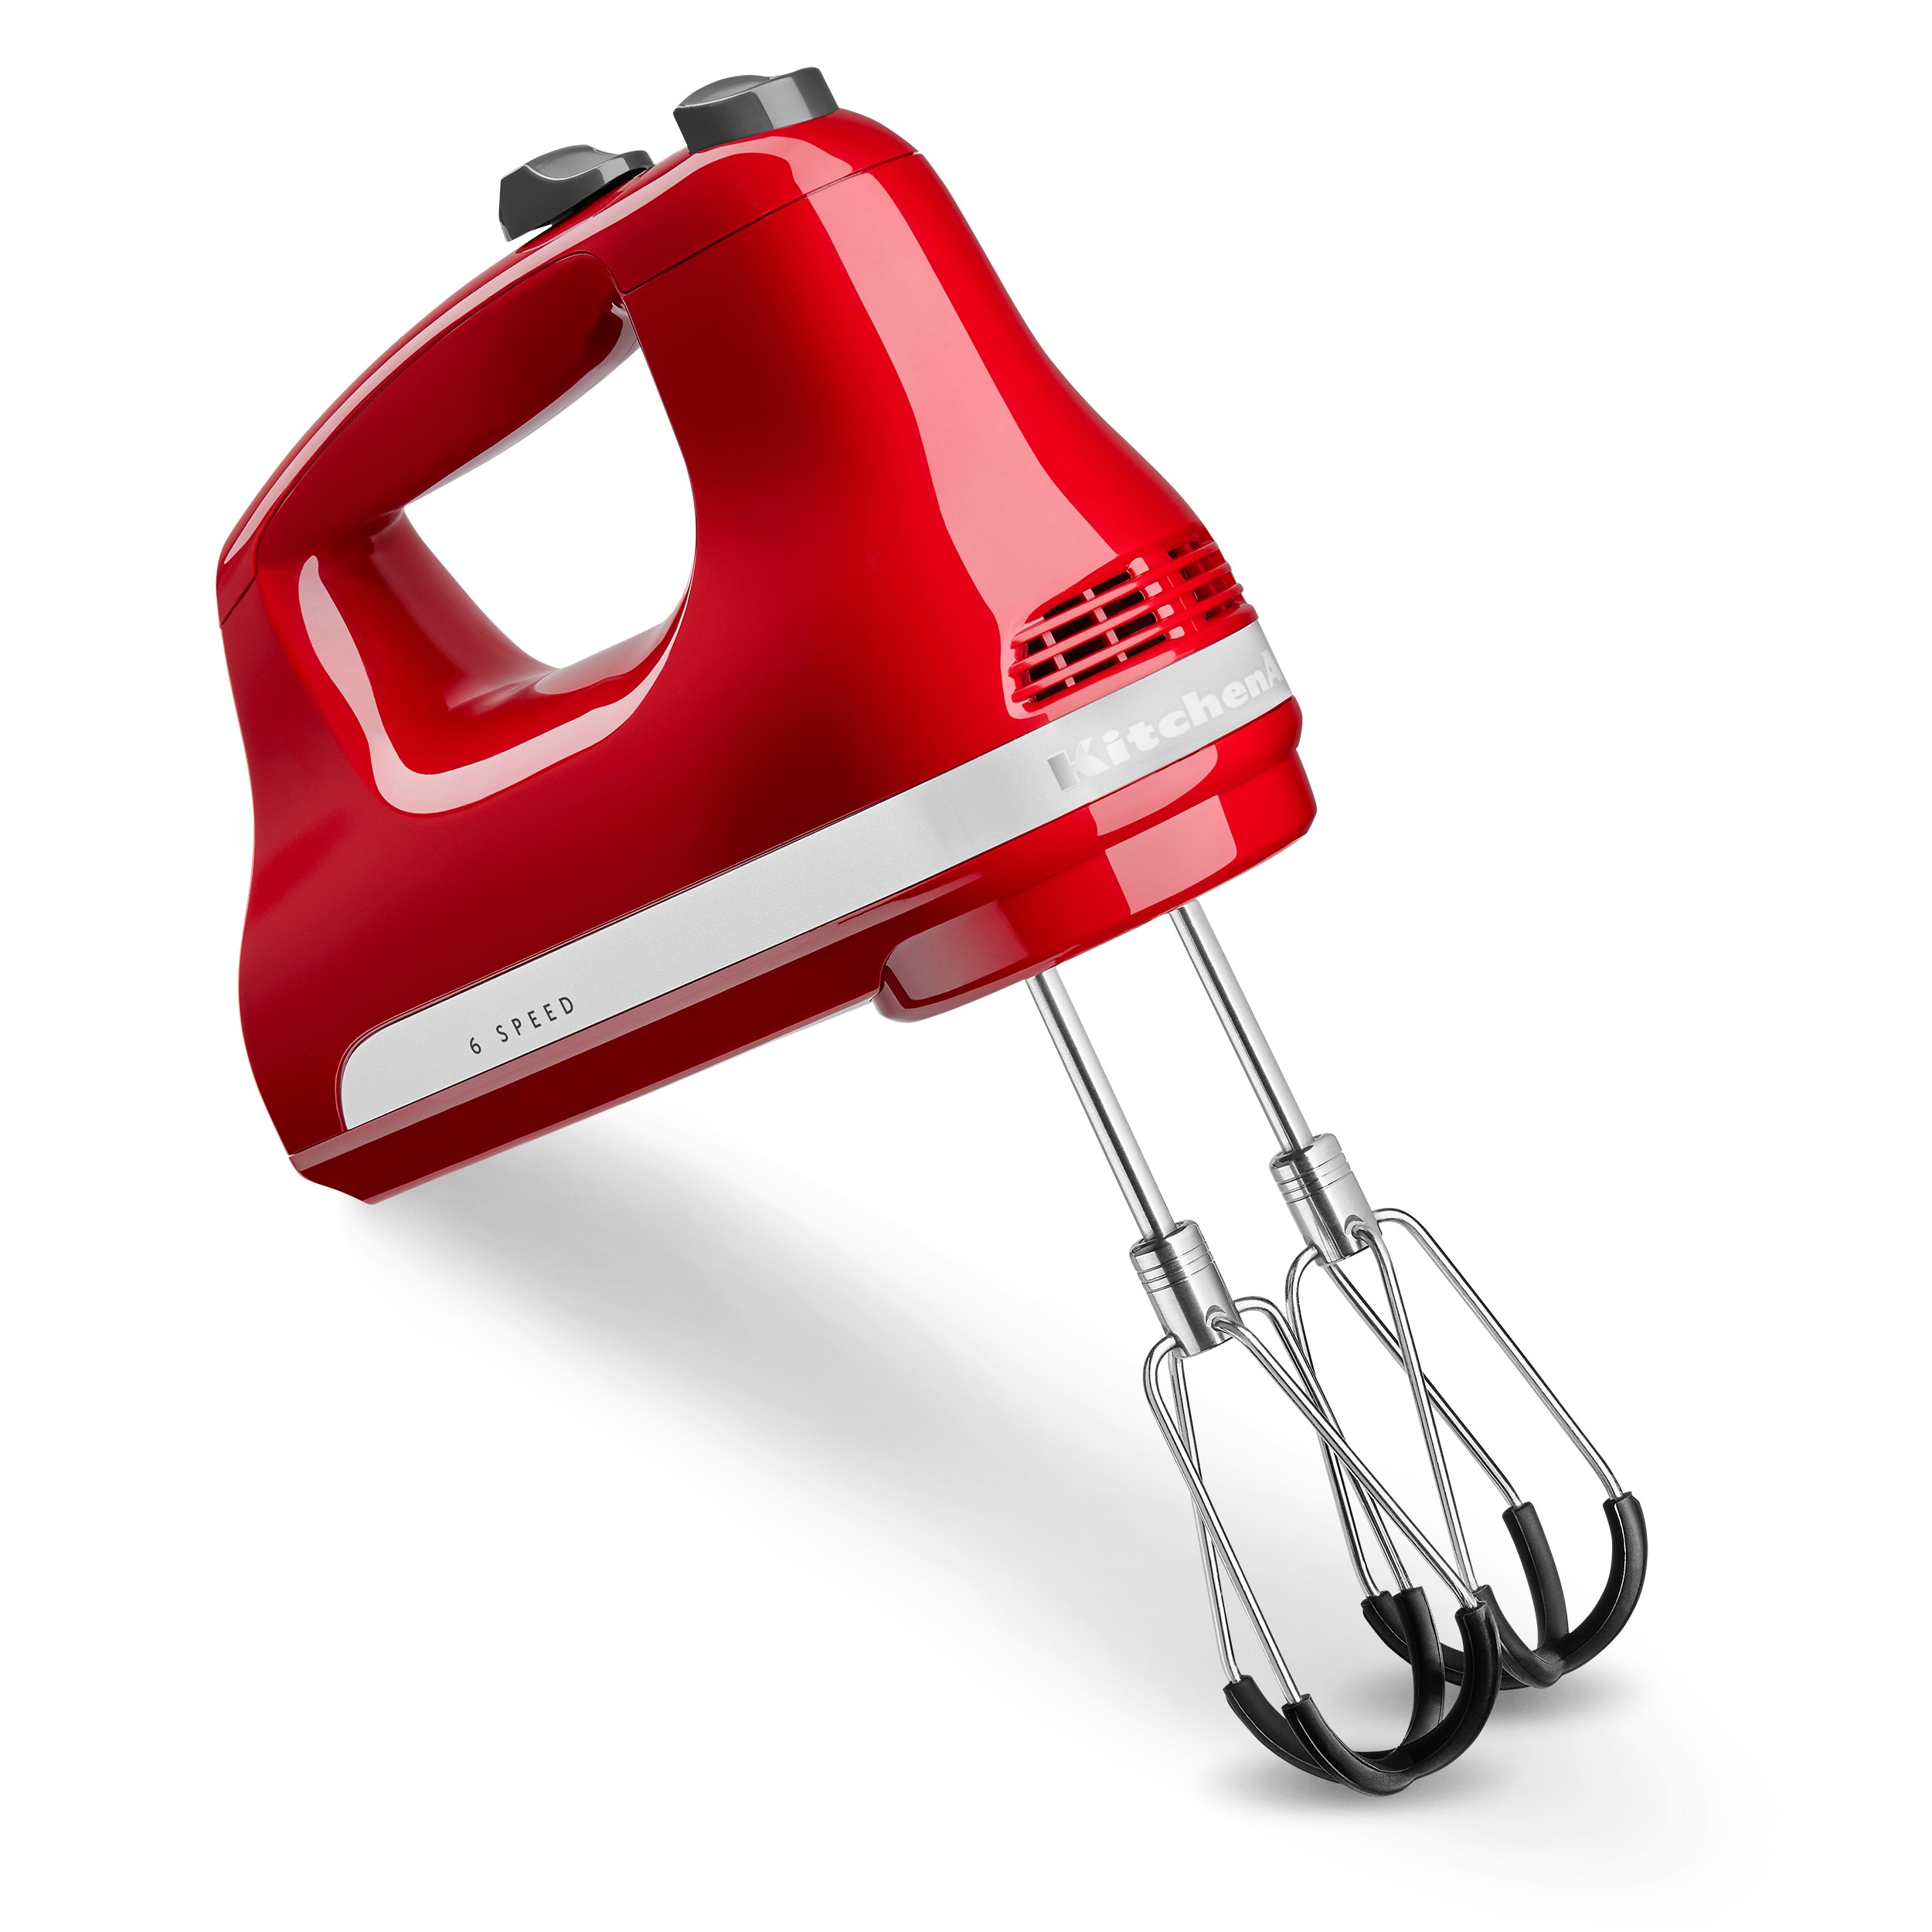 KitchenAid 9 Speed Red Hand Mixer with Accessory Pack